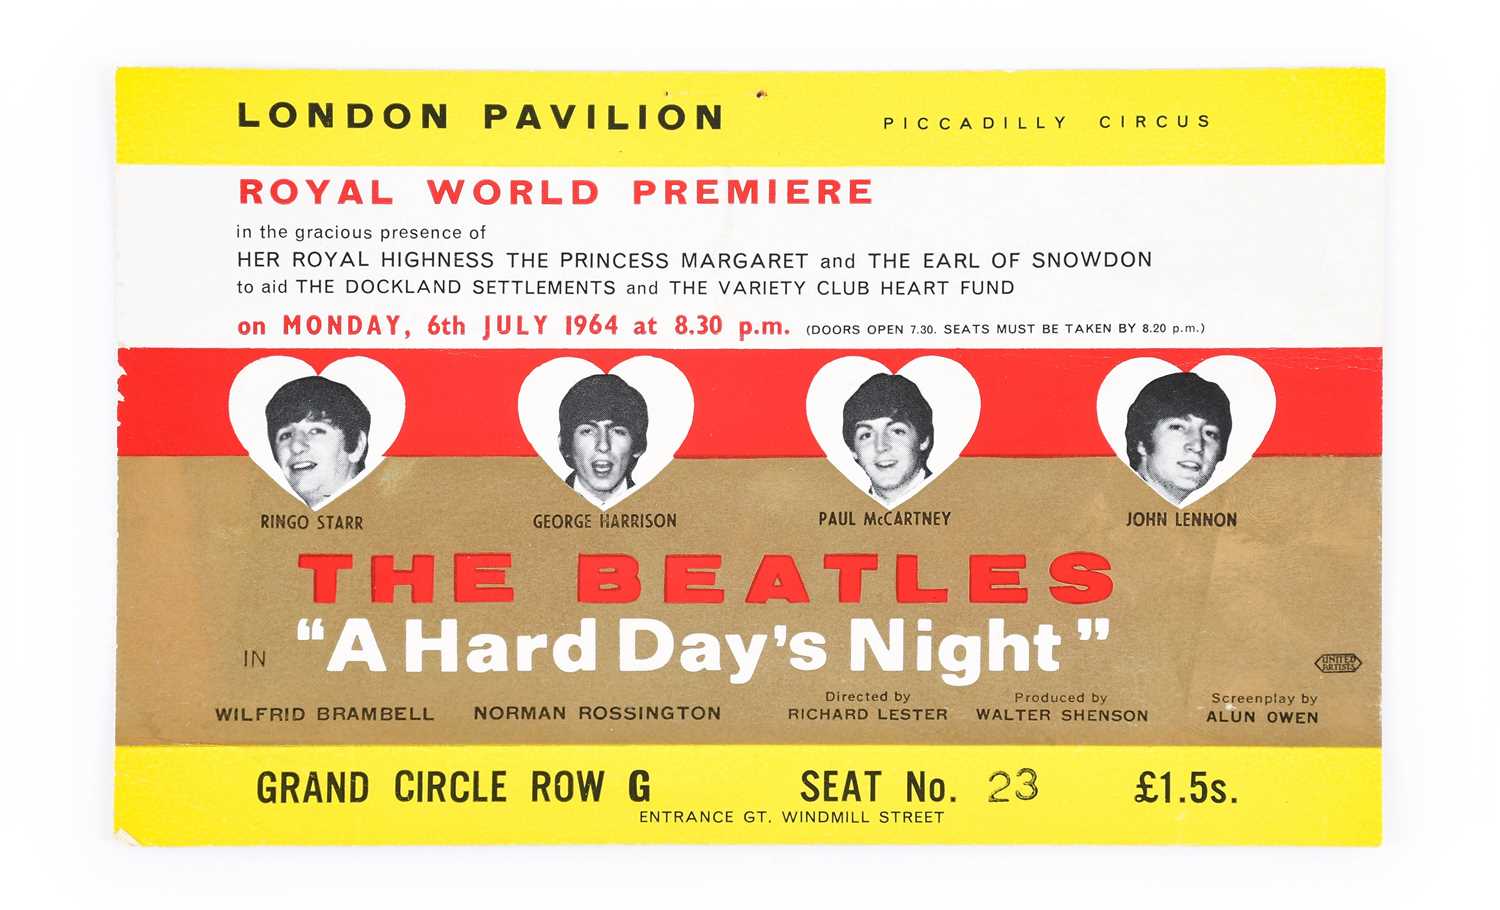 The Beatle A Hard Days Night Royal World Premier Programme - Image 3 of 3